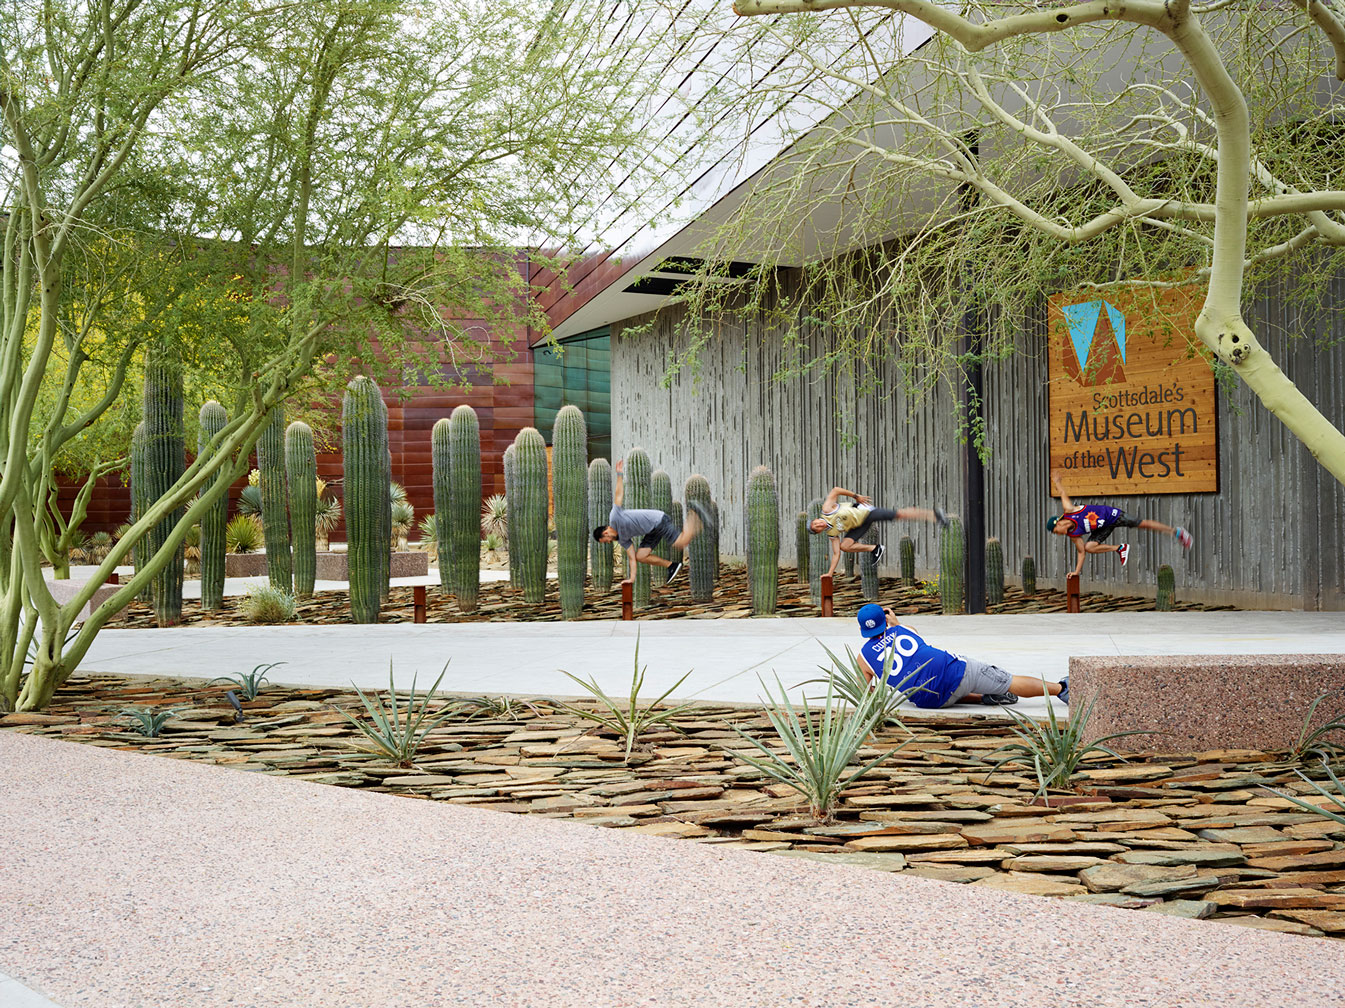 Scottsdale's Museum of the West - Front